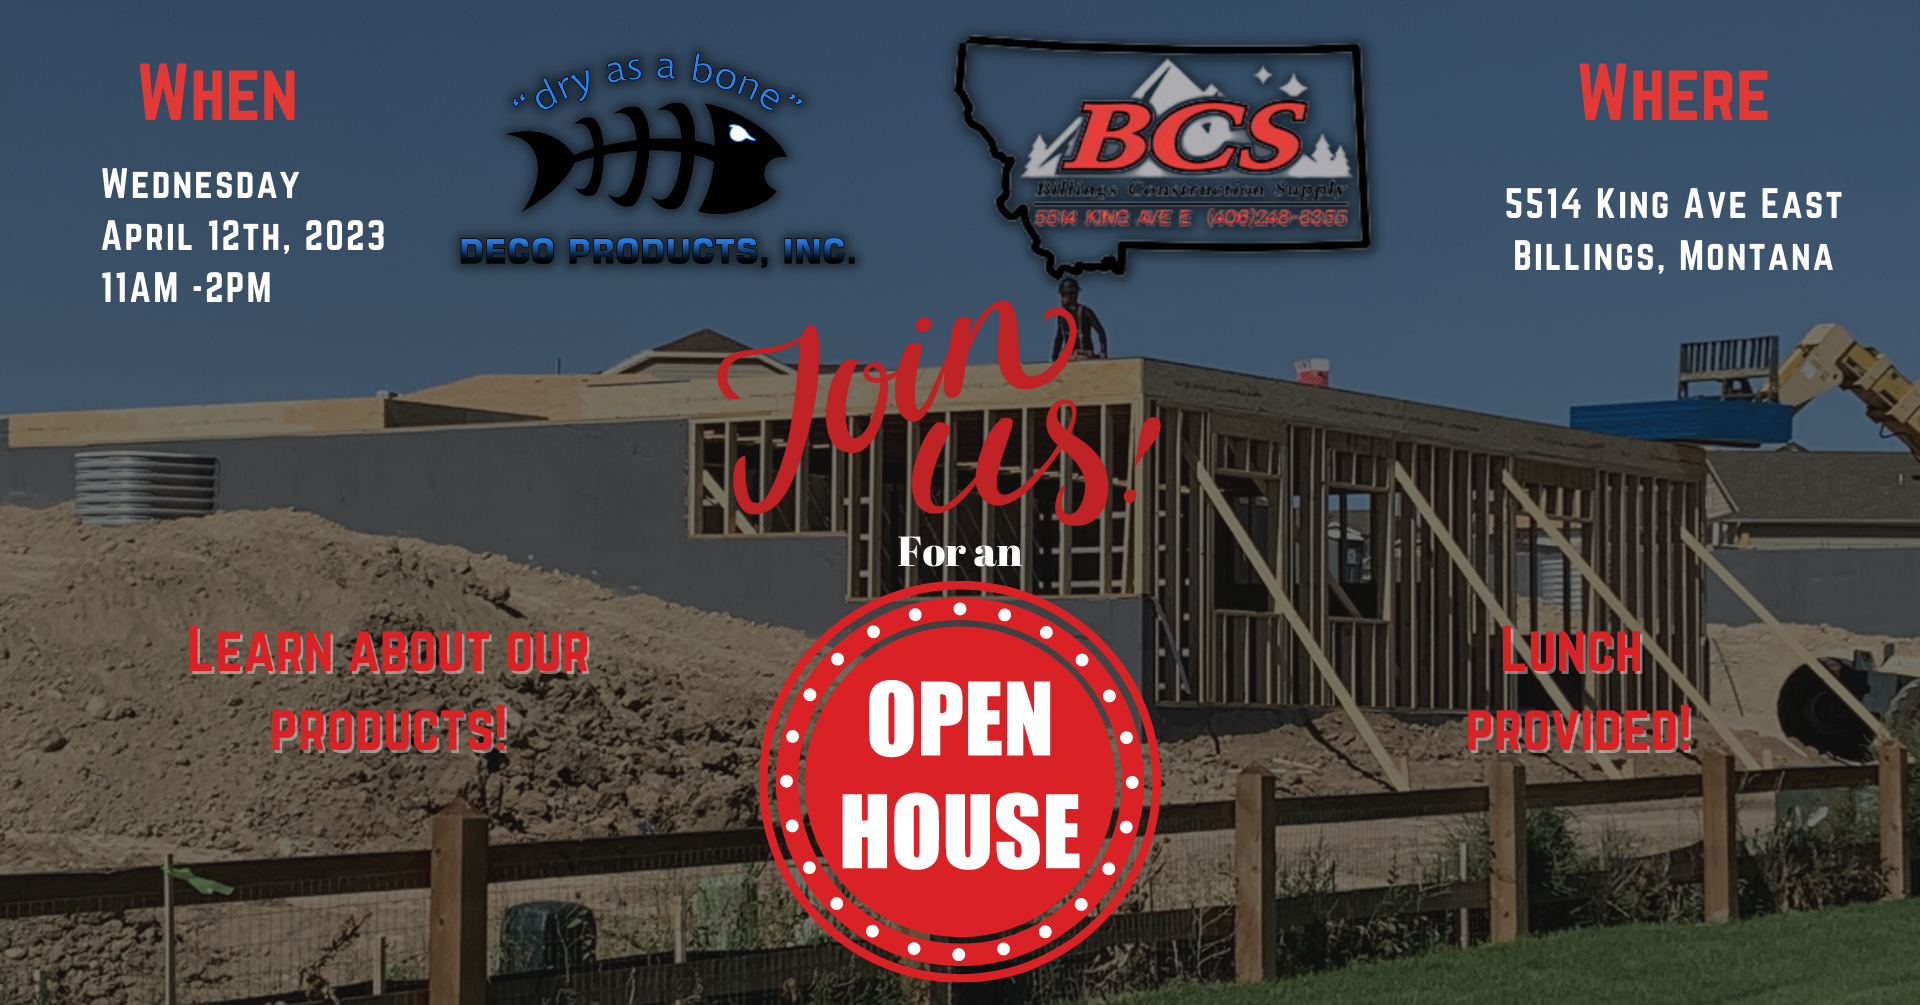 flyer promoting an open house in Montana